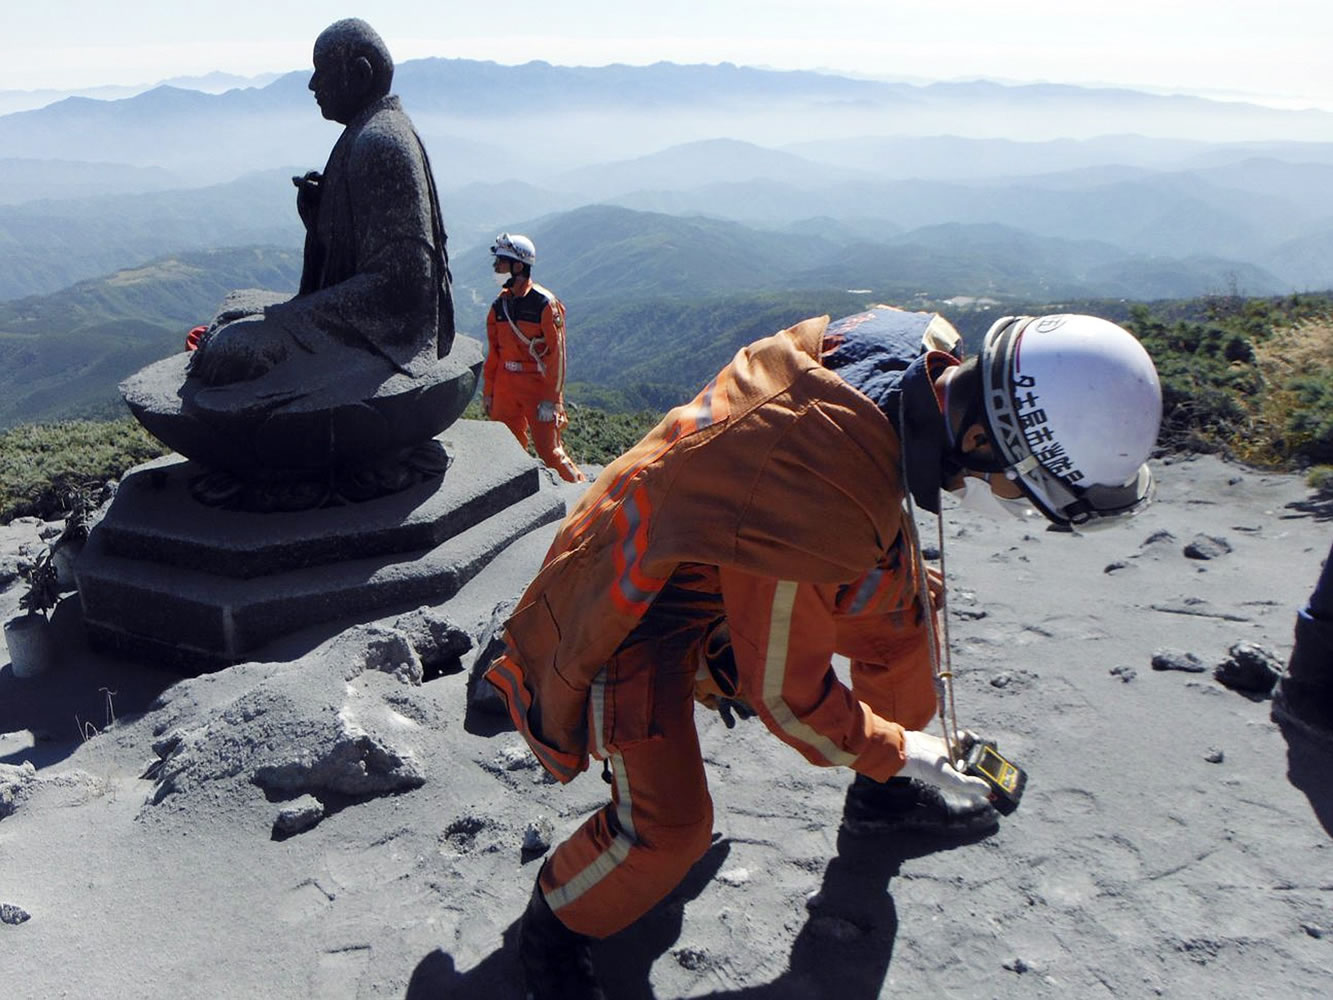 A Nagoya City firefighter uses a gas analyzer to check toxic volcanic fumes next to a Buddha statue near the summit of the Mount Ontake in central Japan.